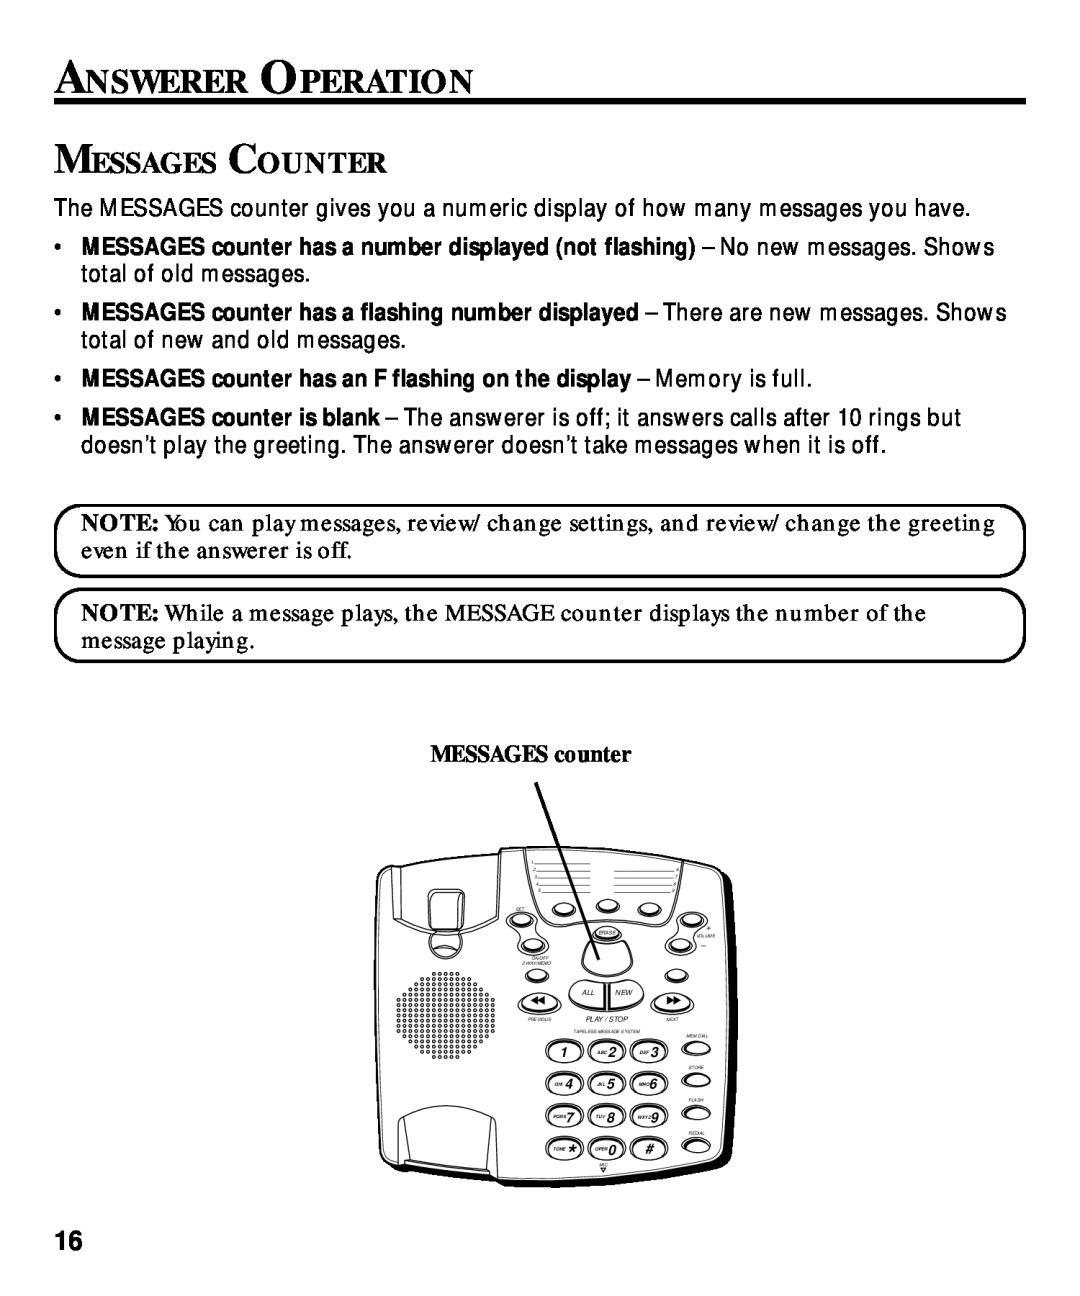 GE 29870 Series manual Answerer Operation, Messages Counter, MESSAGES counter 